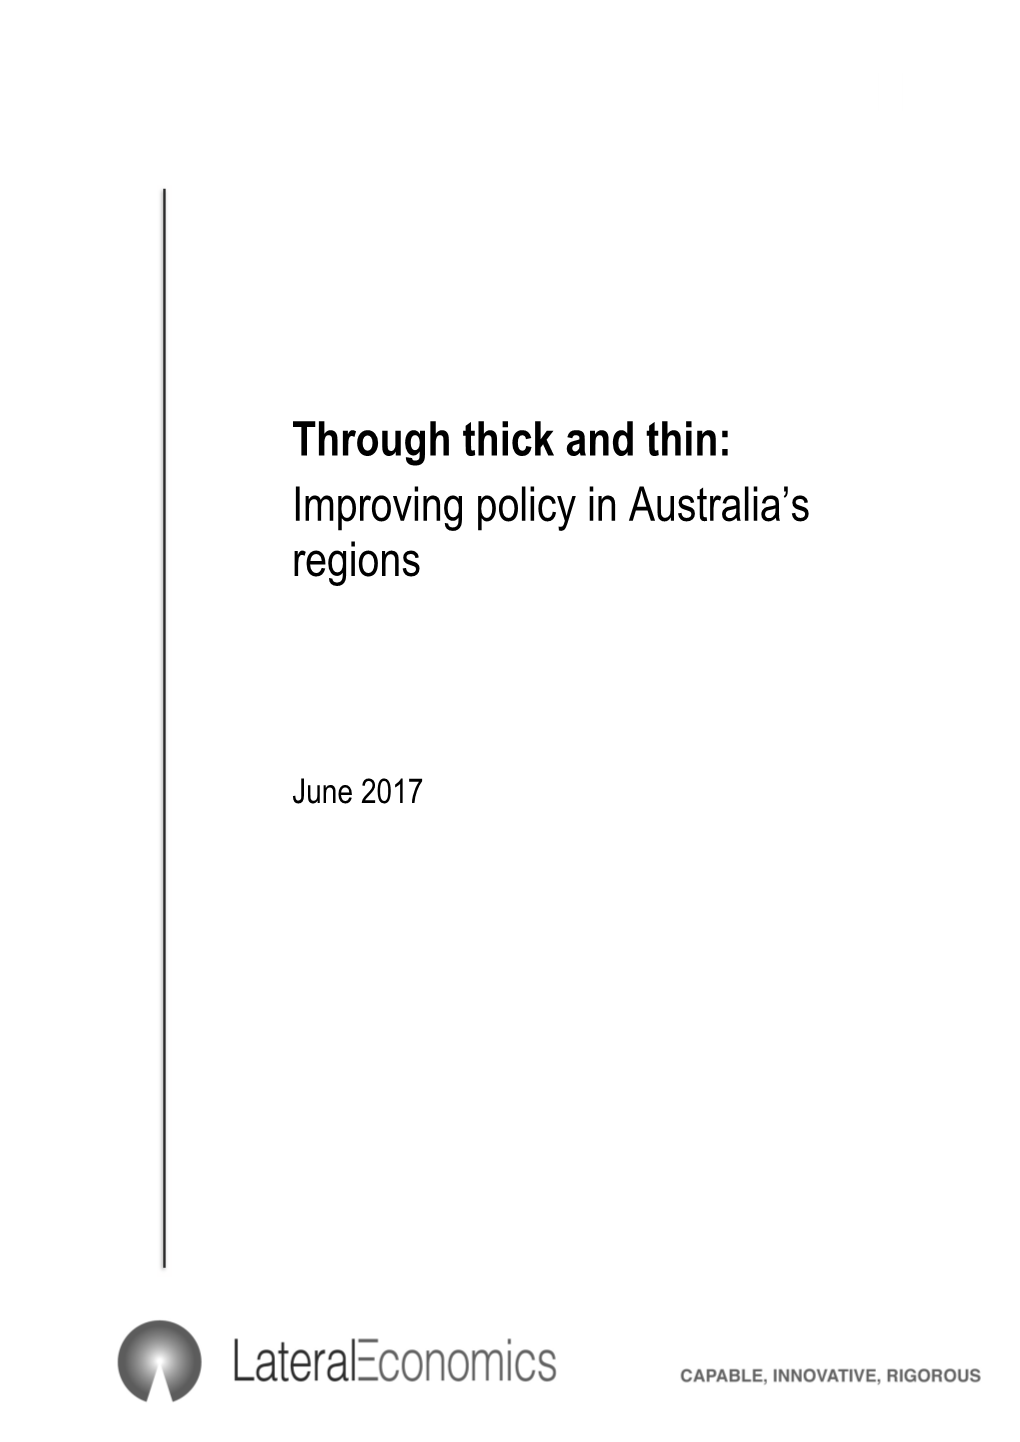 Through Thick and Thin: Improving Policy in Australia's Regions